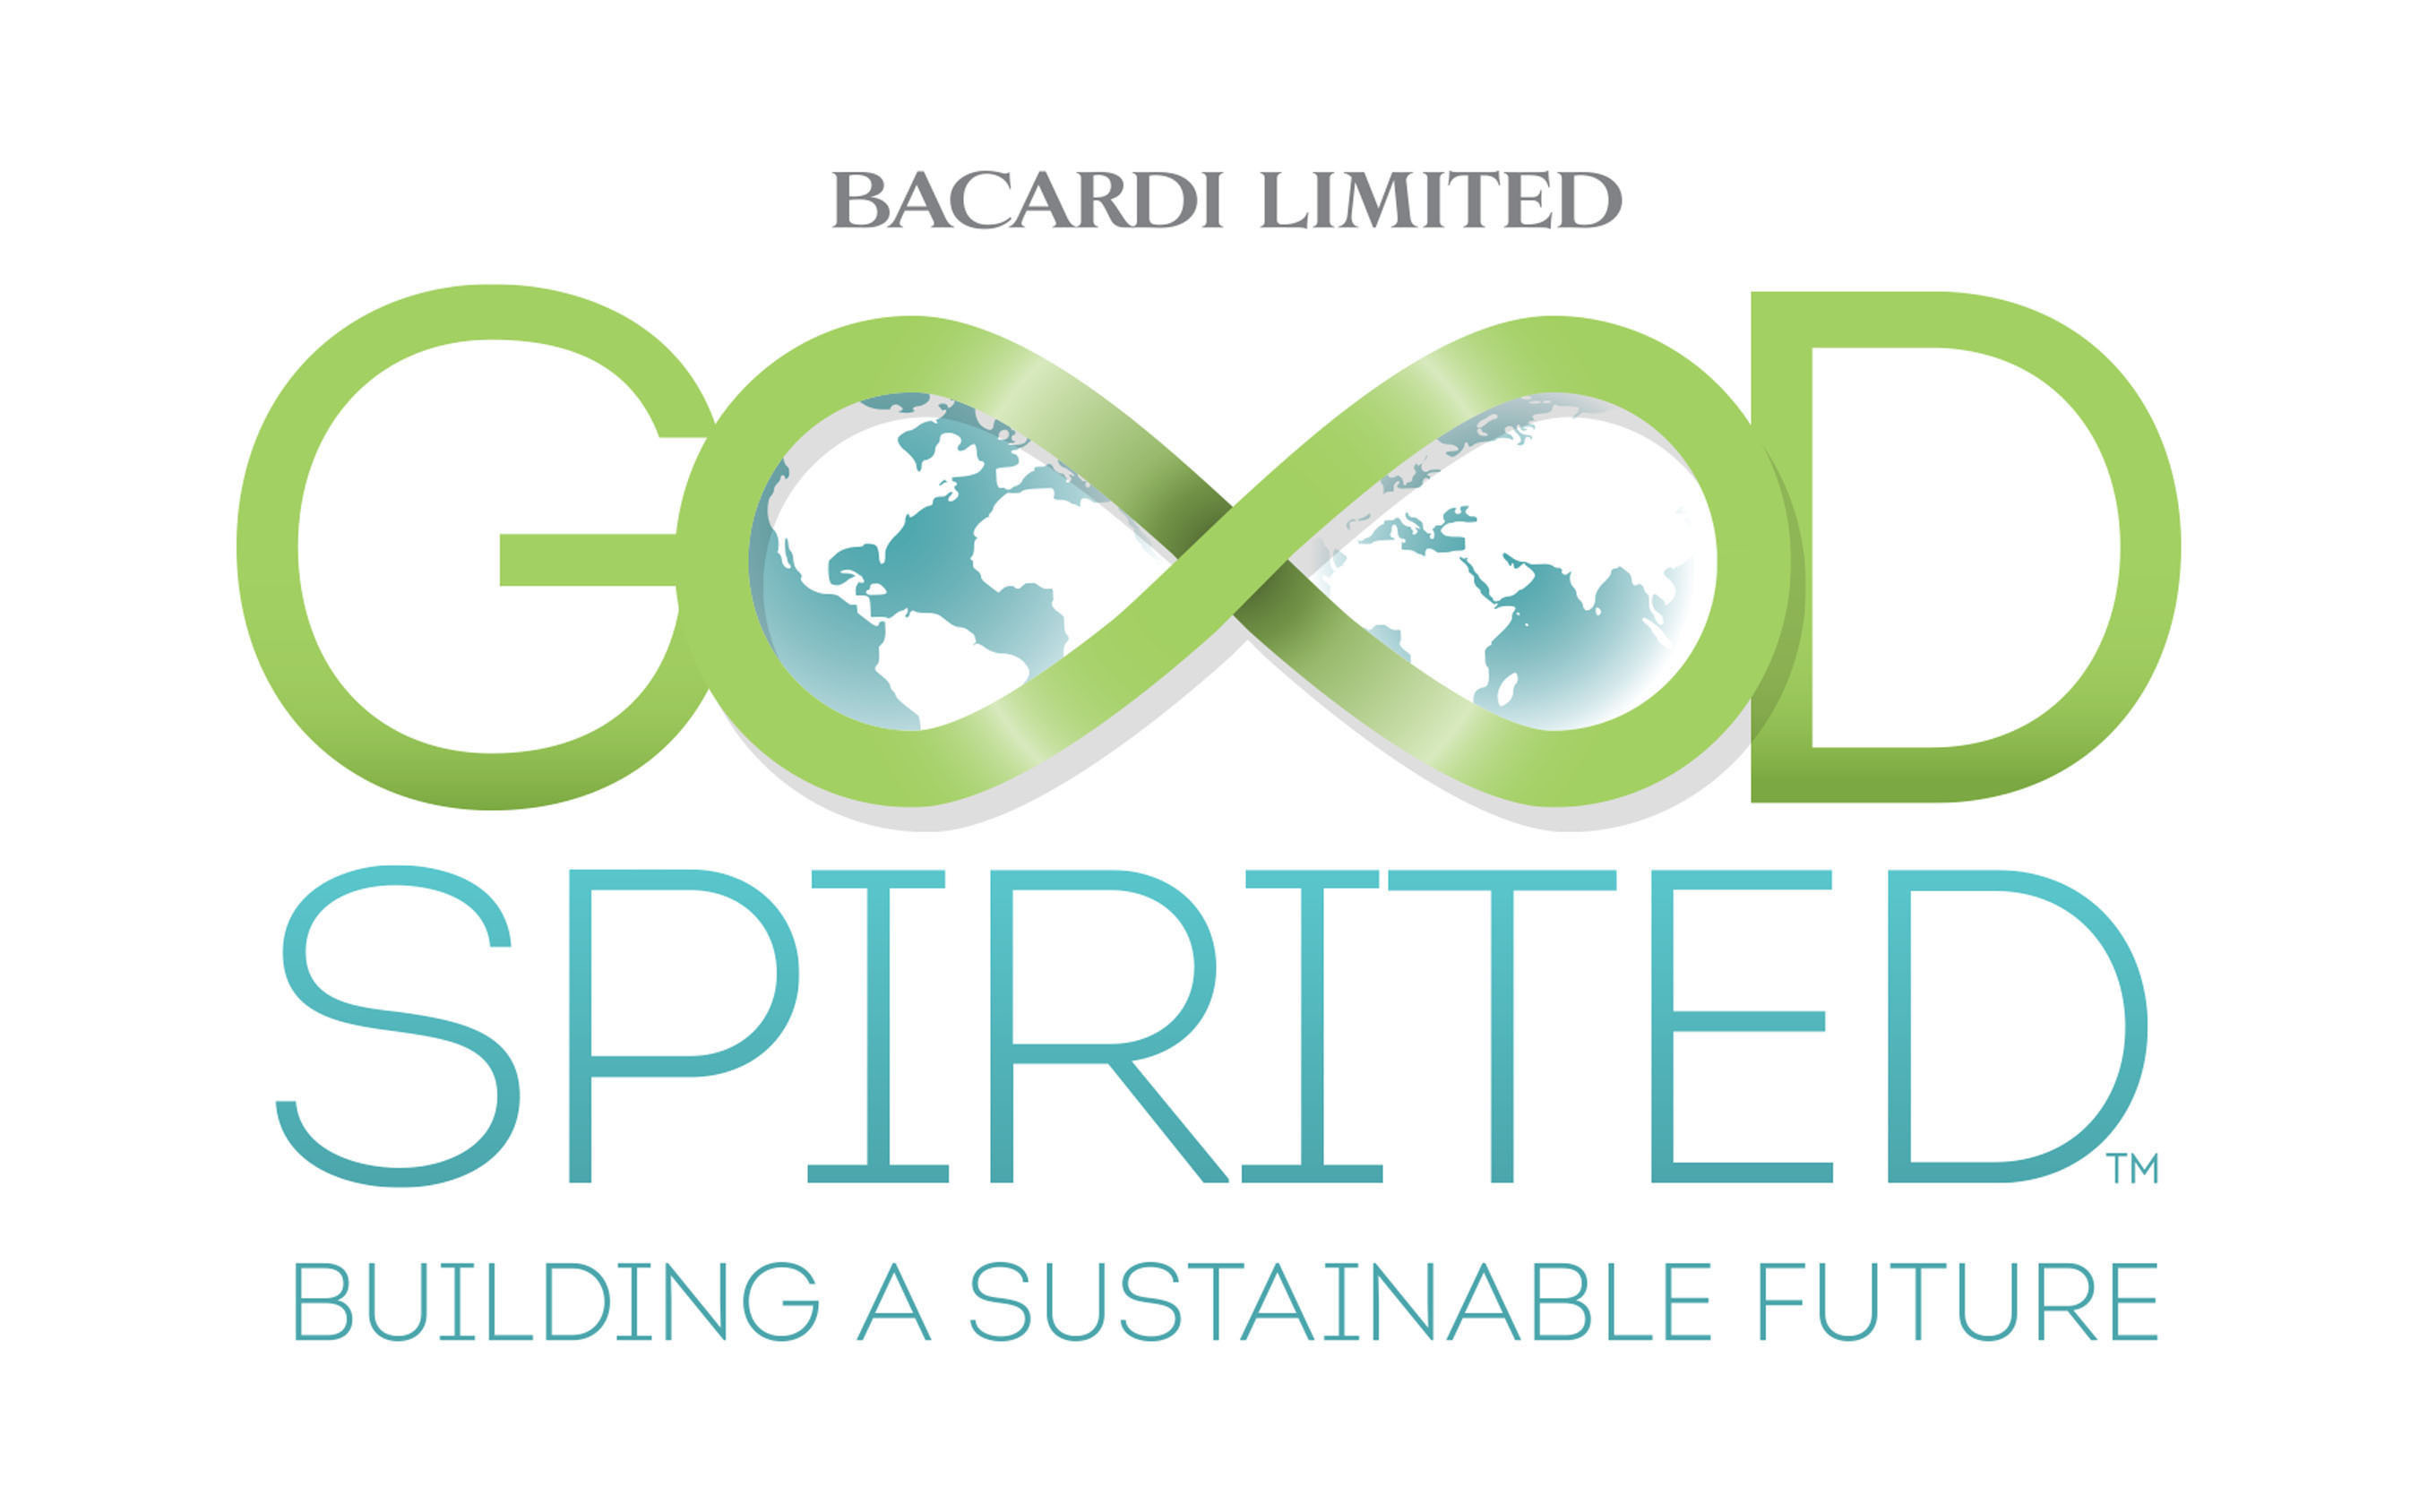 Bacardi Limited, the largest privately held spirits company in the world, sets a bold new course for a more sustainable future with its "Good Spirited" initiative.